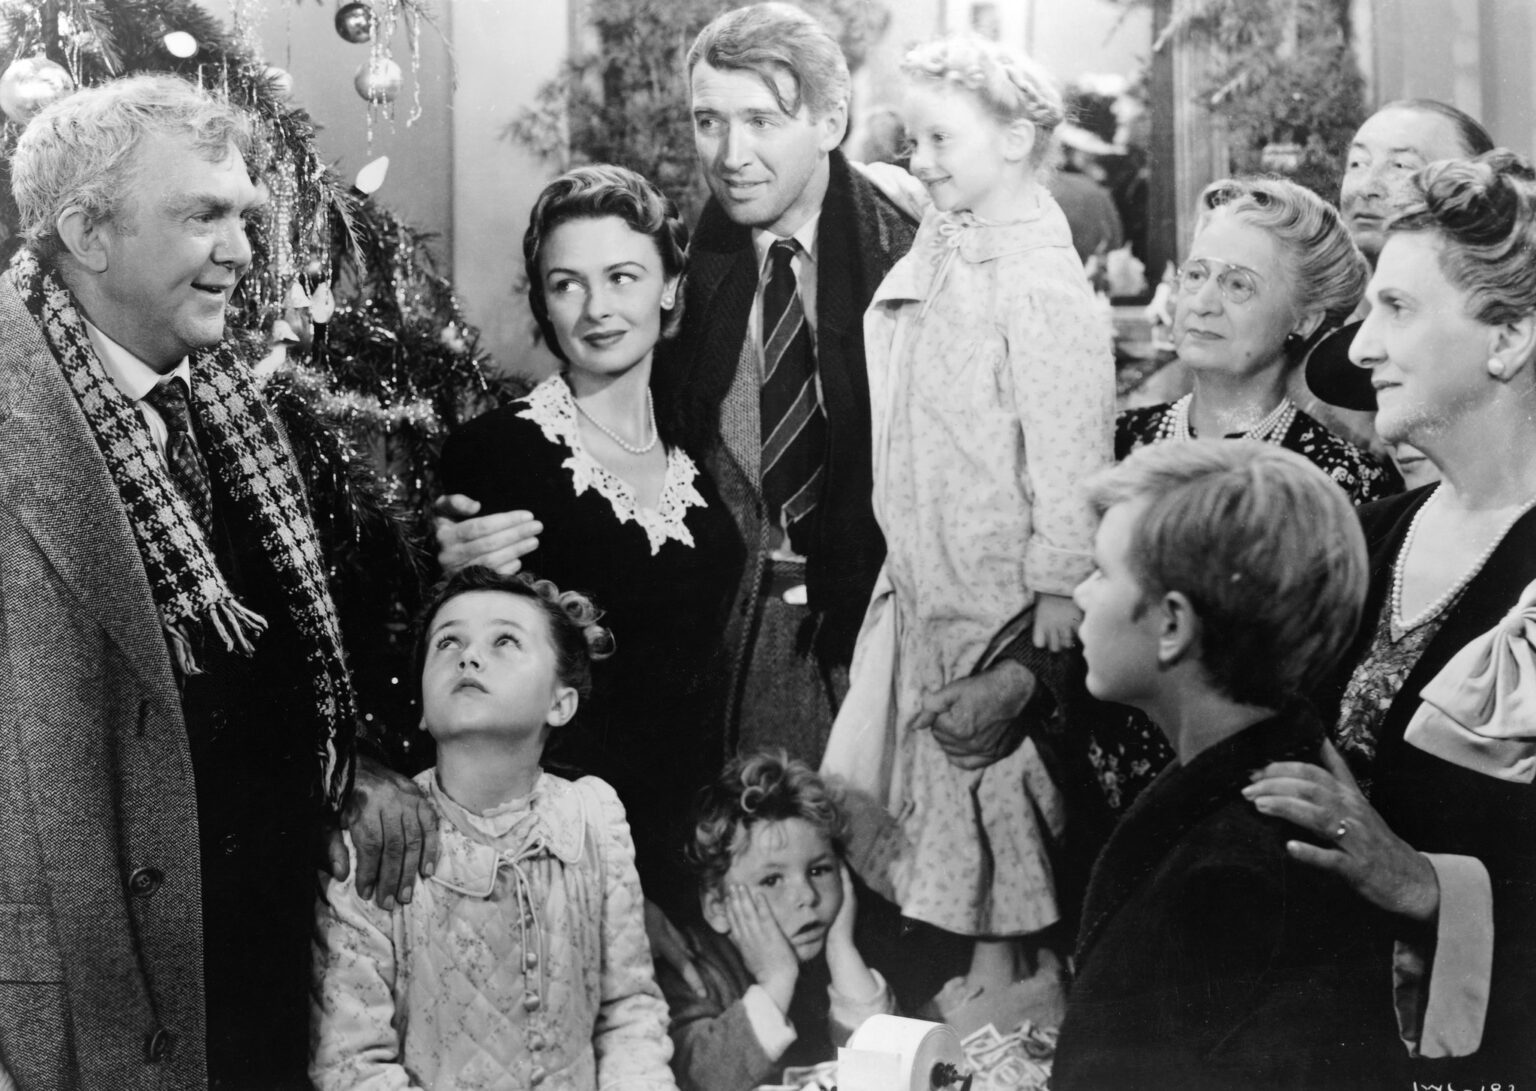 Follow the Christmastime trials and travails of George Bailey when “It's a Wonderful Life” screens Dec. 17–18 at the New Prospect Theatre